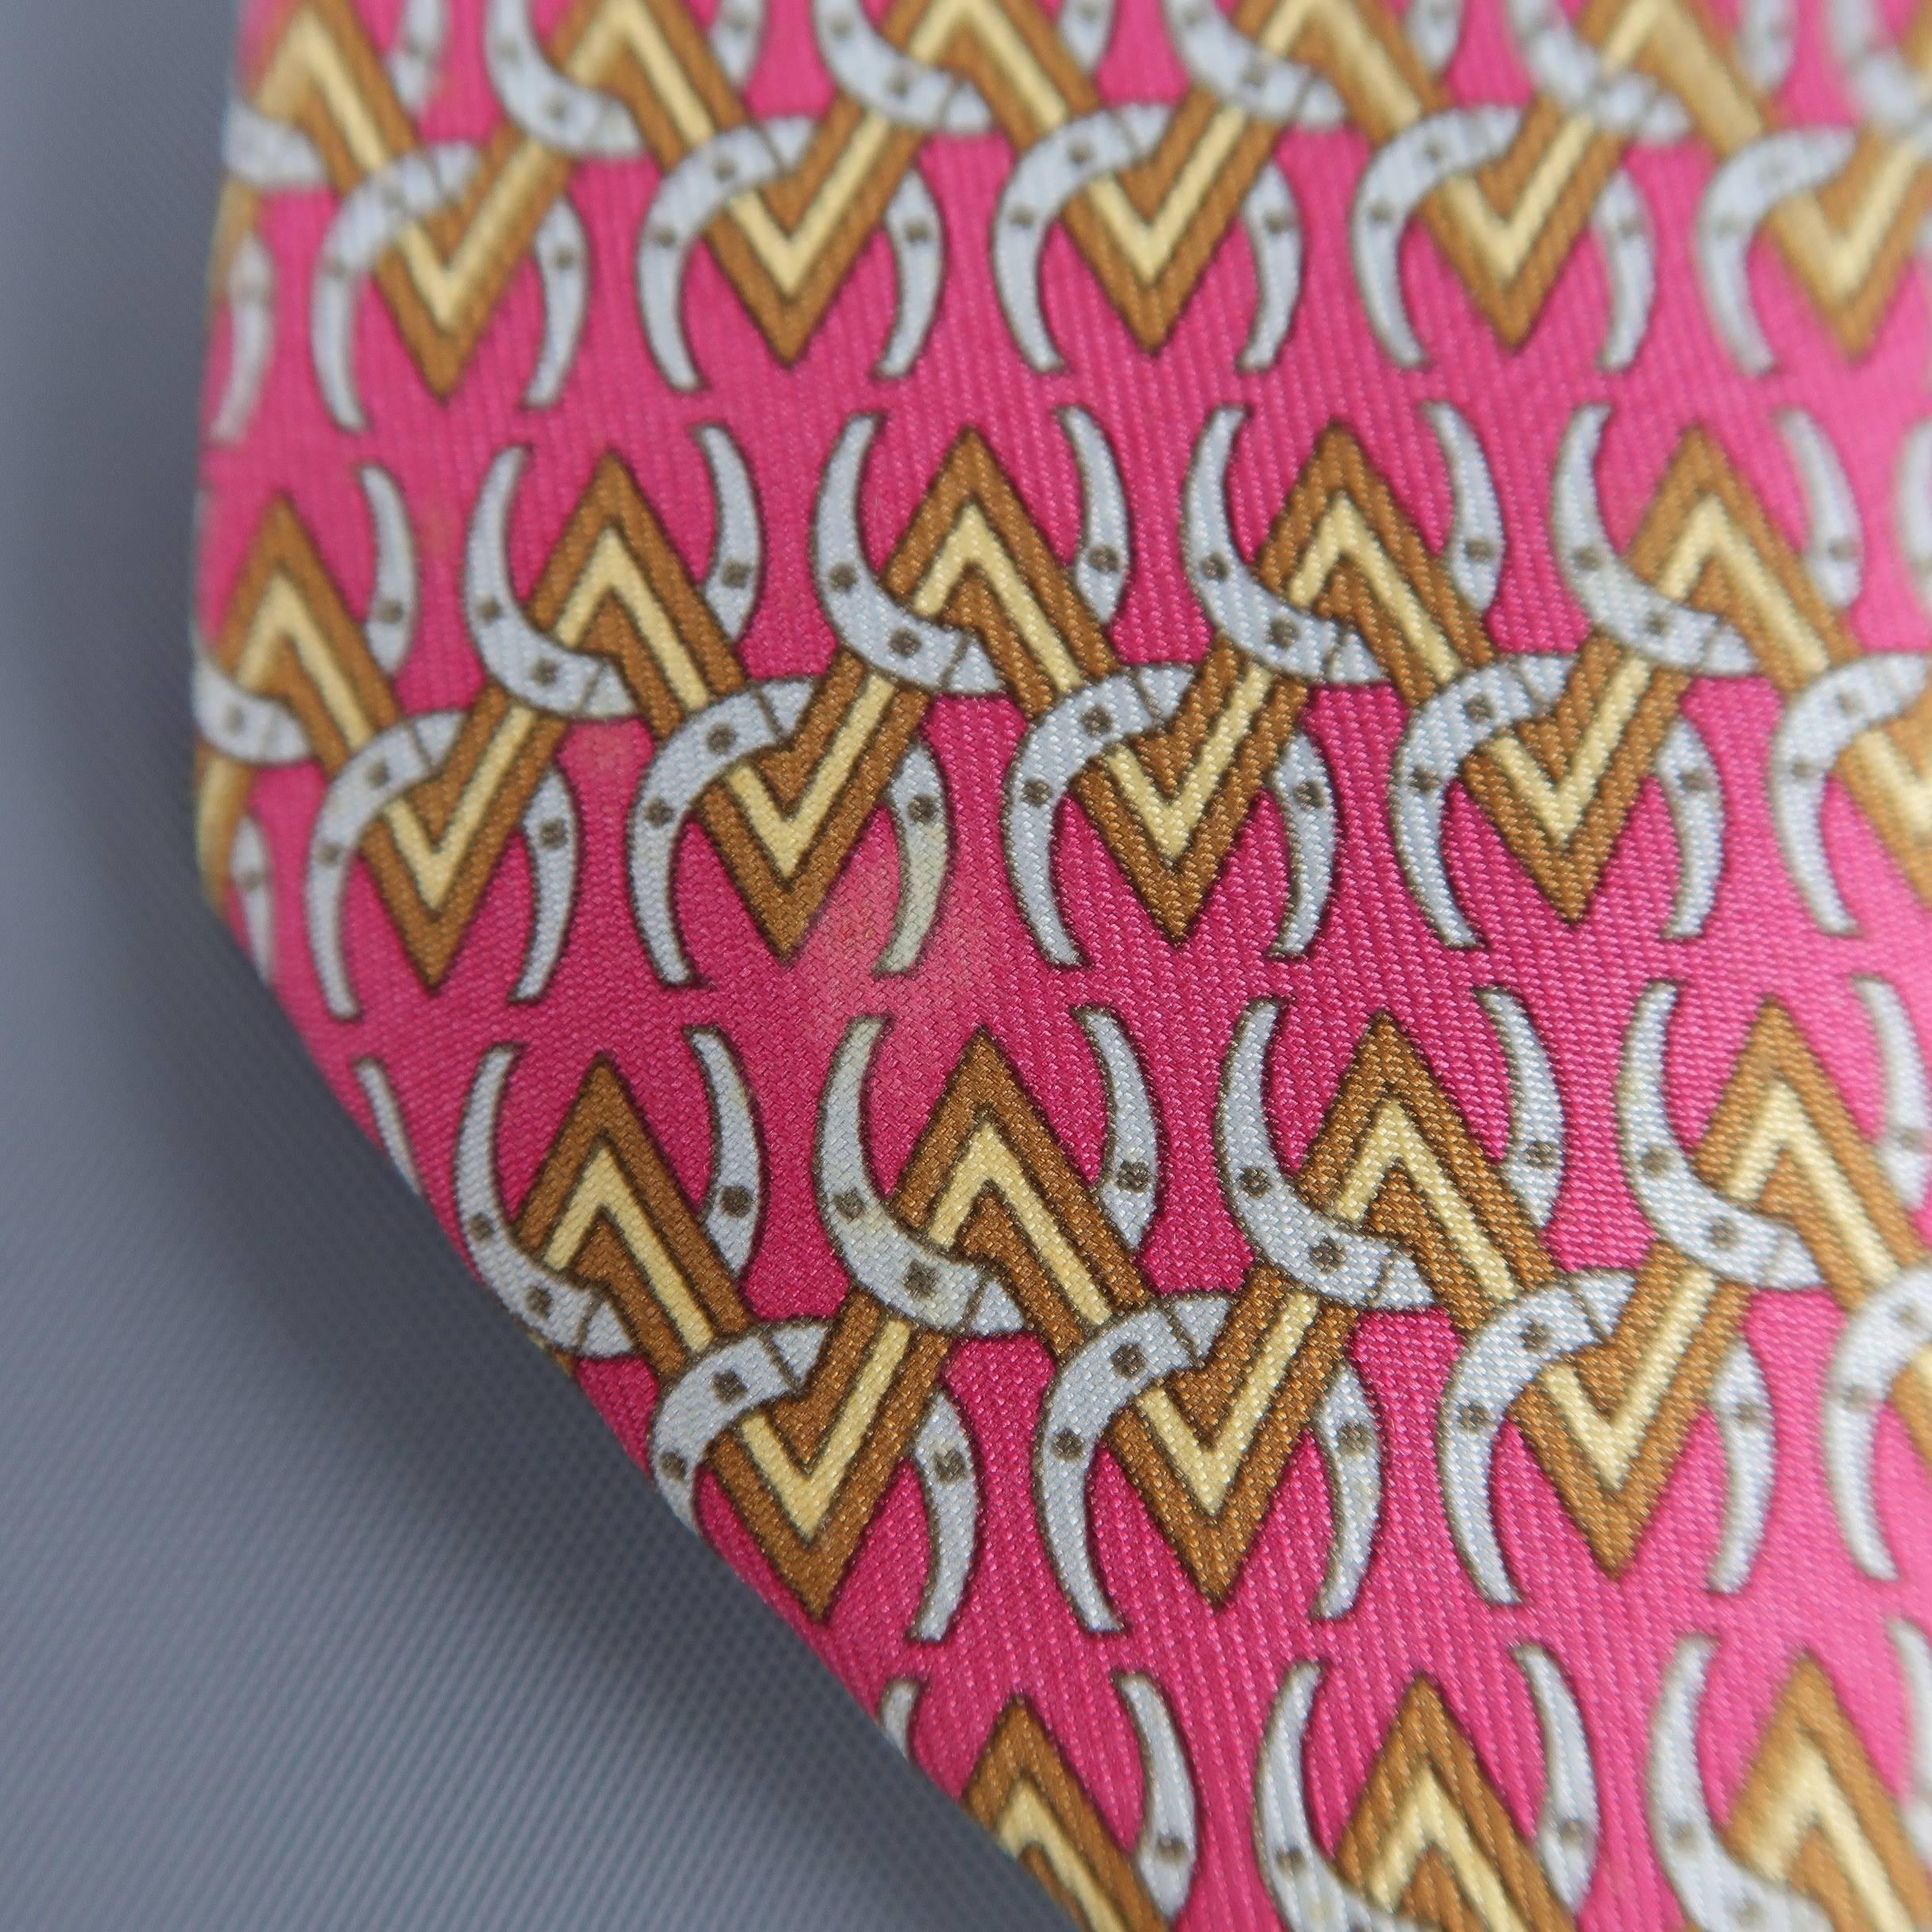 Vintage HERMES necktie comes in raspberry red silk twill with all over Gold chevron with grey horseshoes print. Stains on front. As-is. Made in France.
 
Fair Pre-Owned Condition.
 
Width: 3.25 in.
